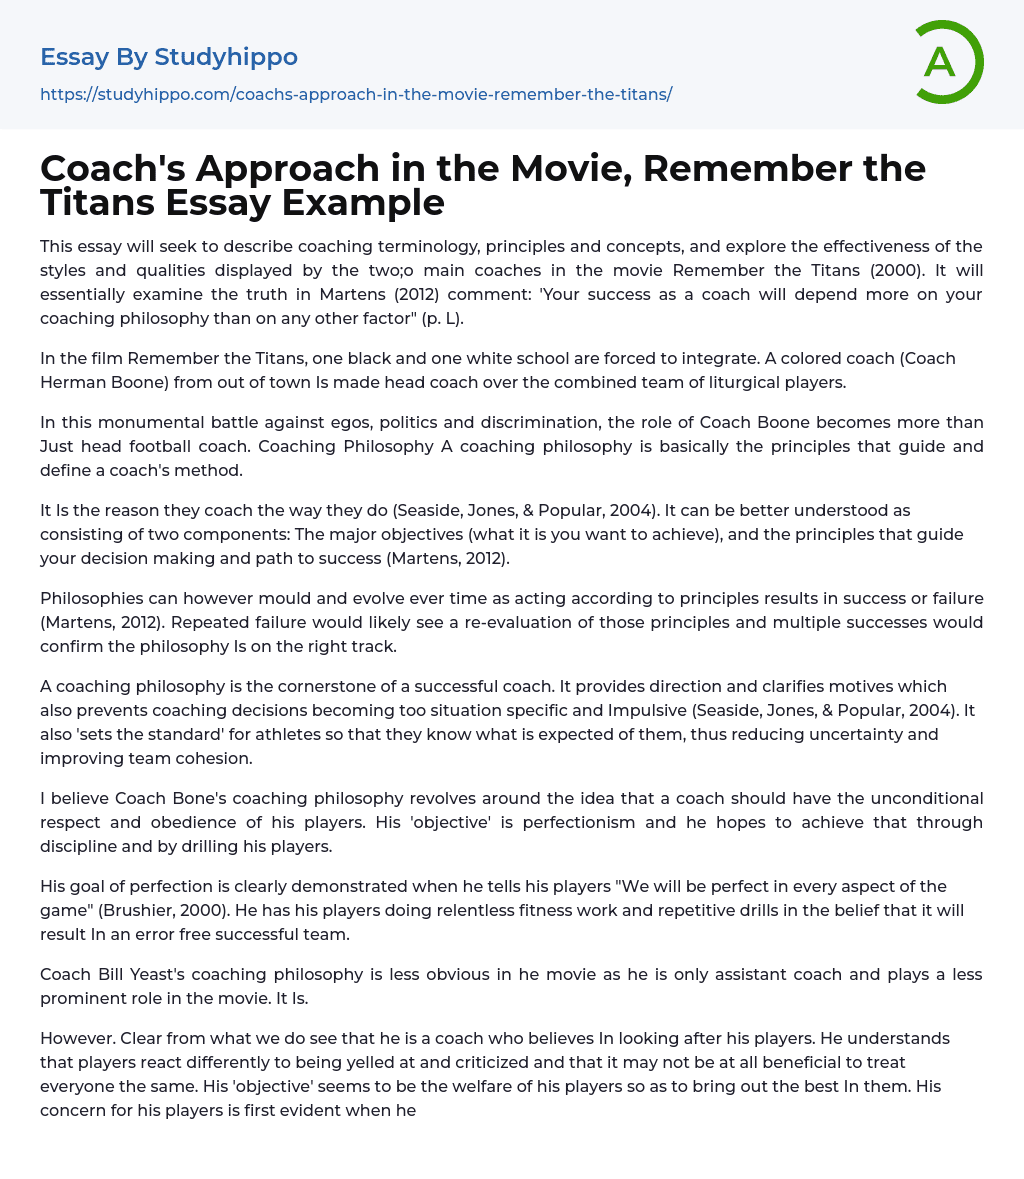 Coach’s Approach in the Movie, Remember the Titans Essay Example